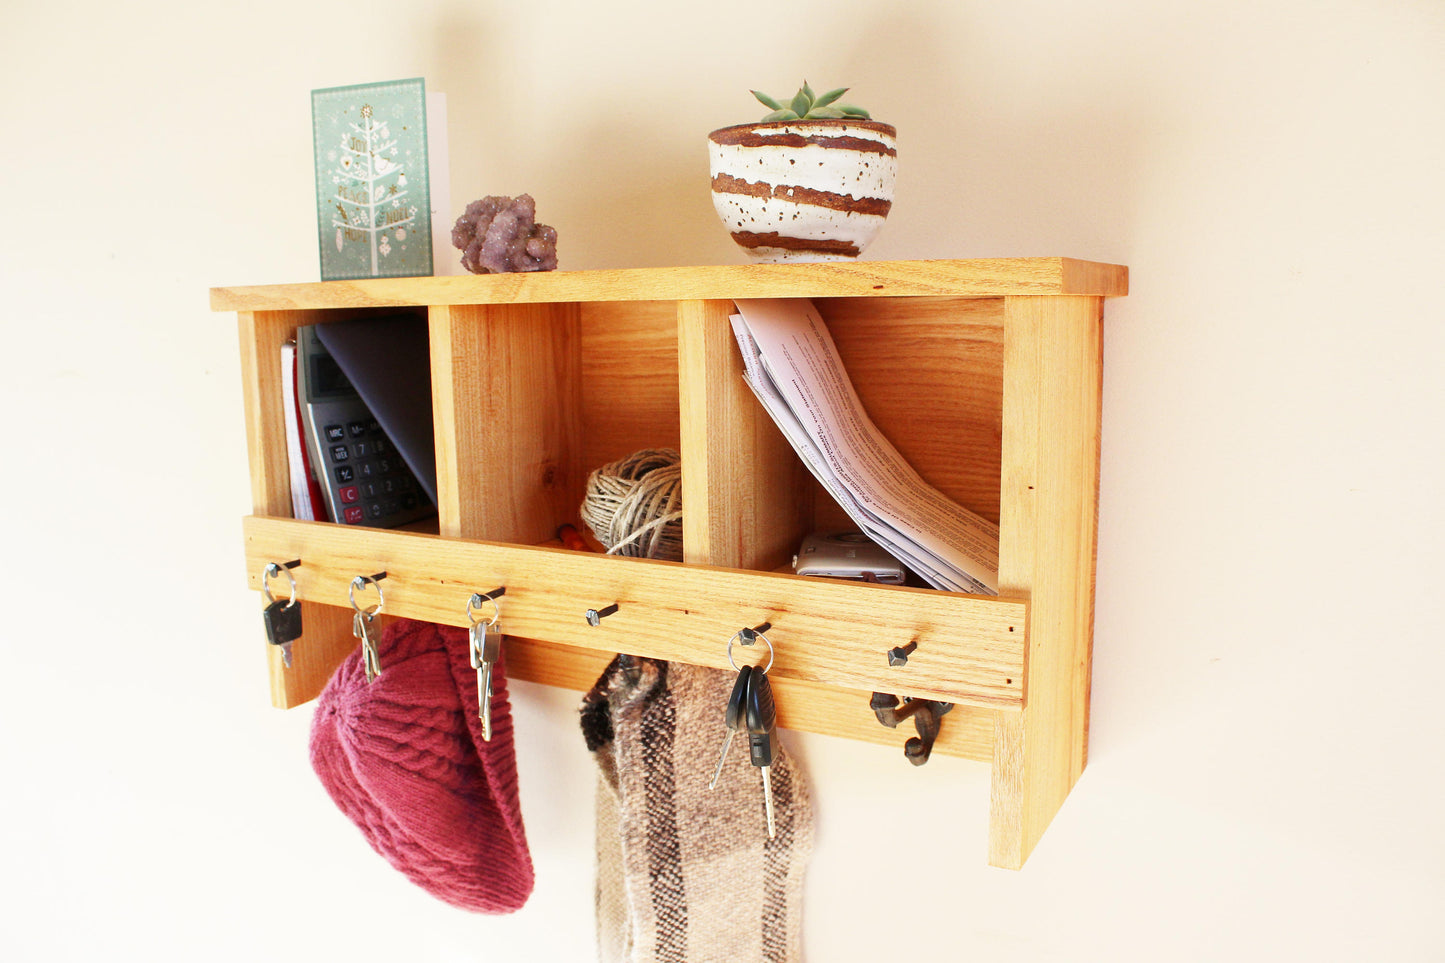 Mulberry Wood Coat Rack with Key Holder and Cubbies